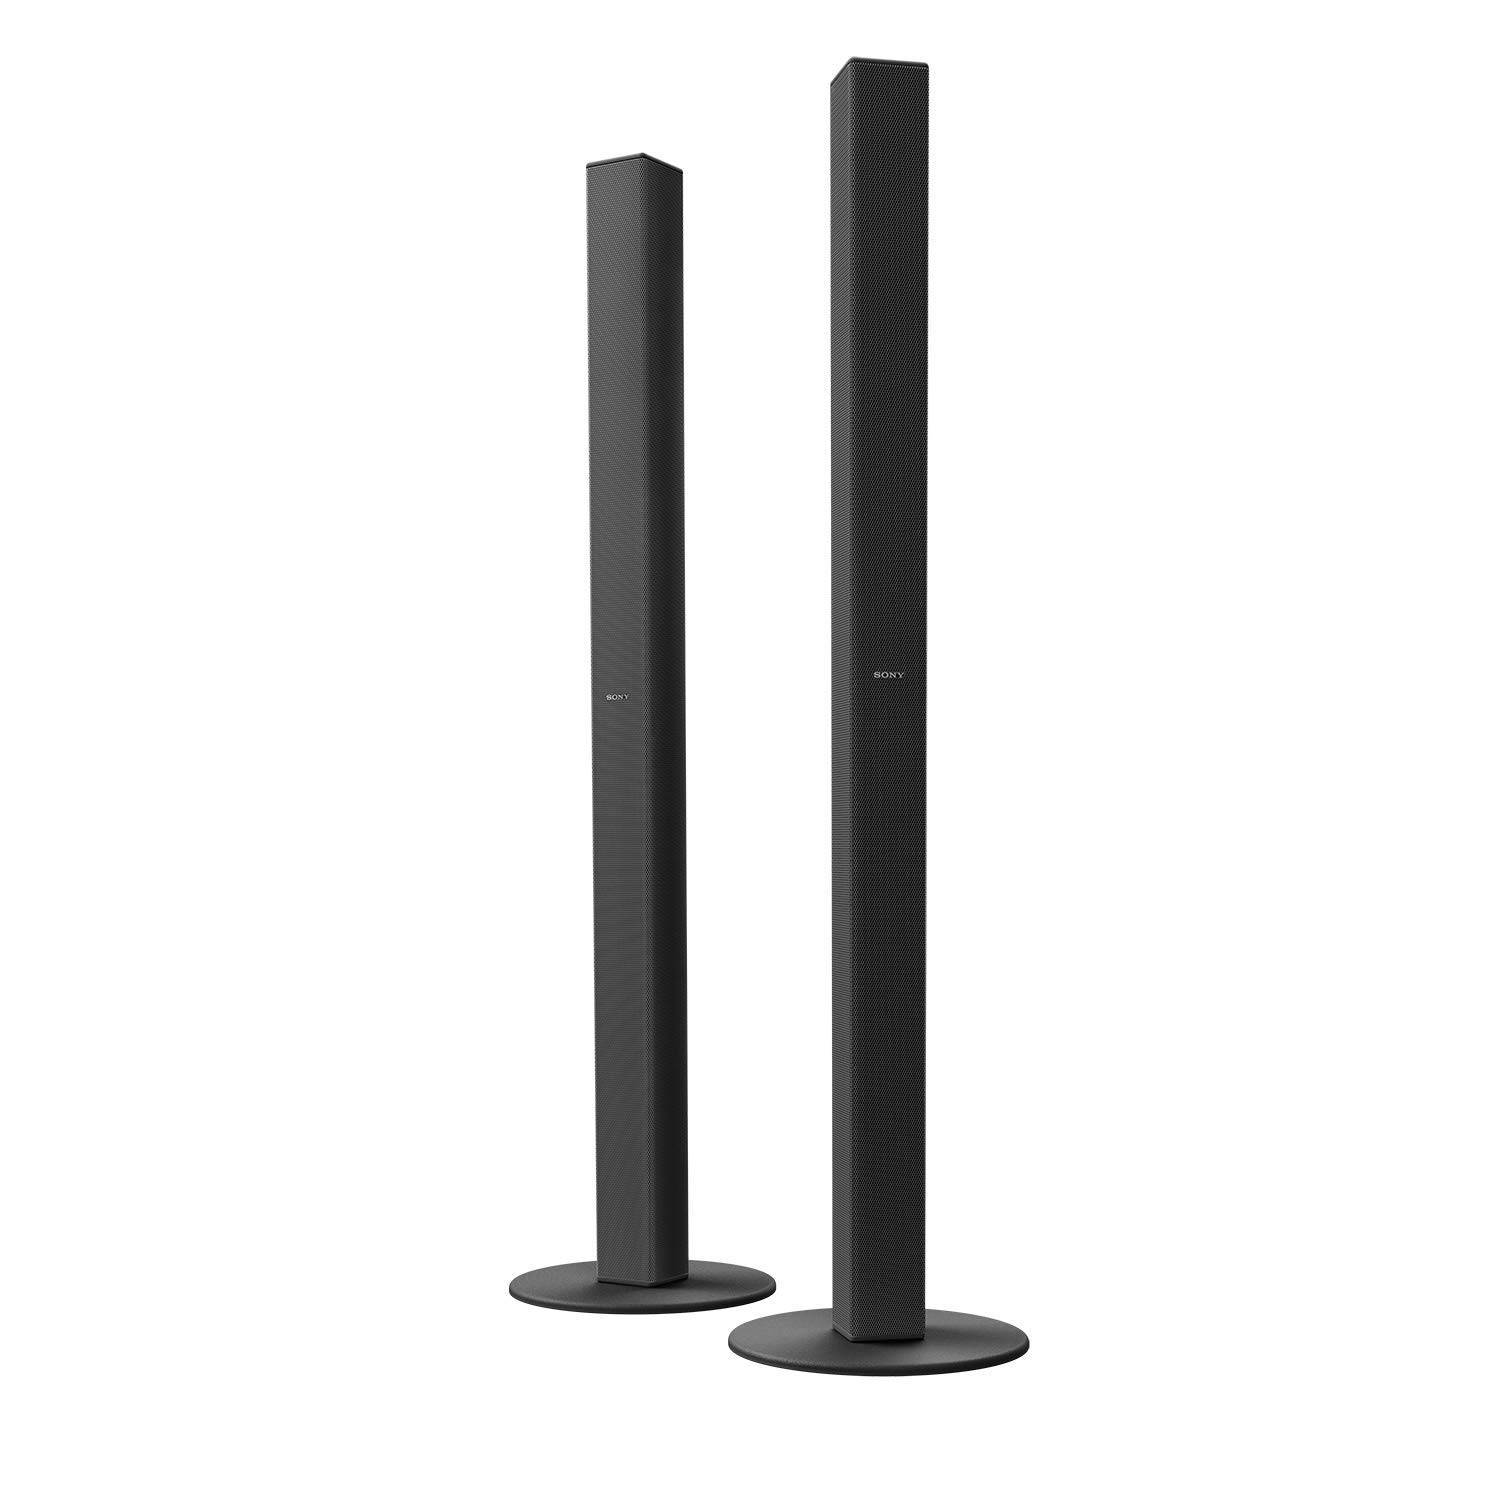 Tall-Boy speakers with Surround Sound